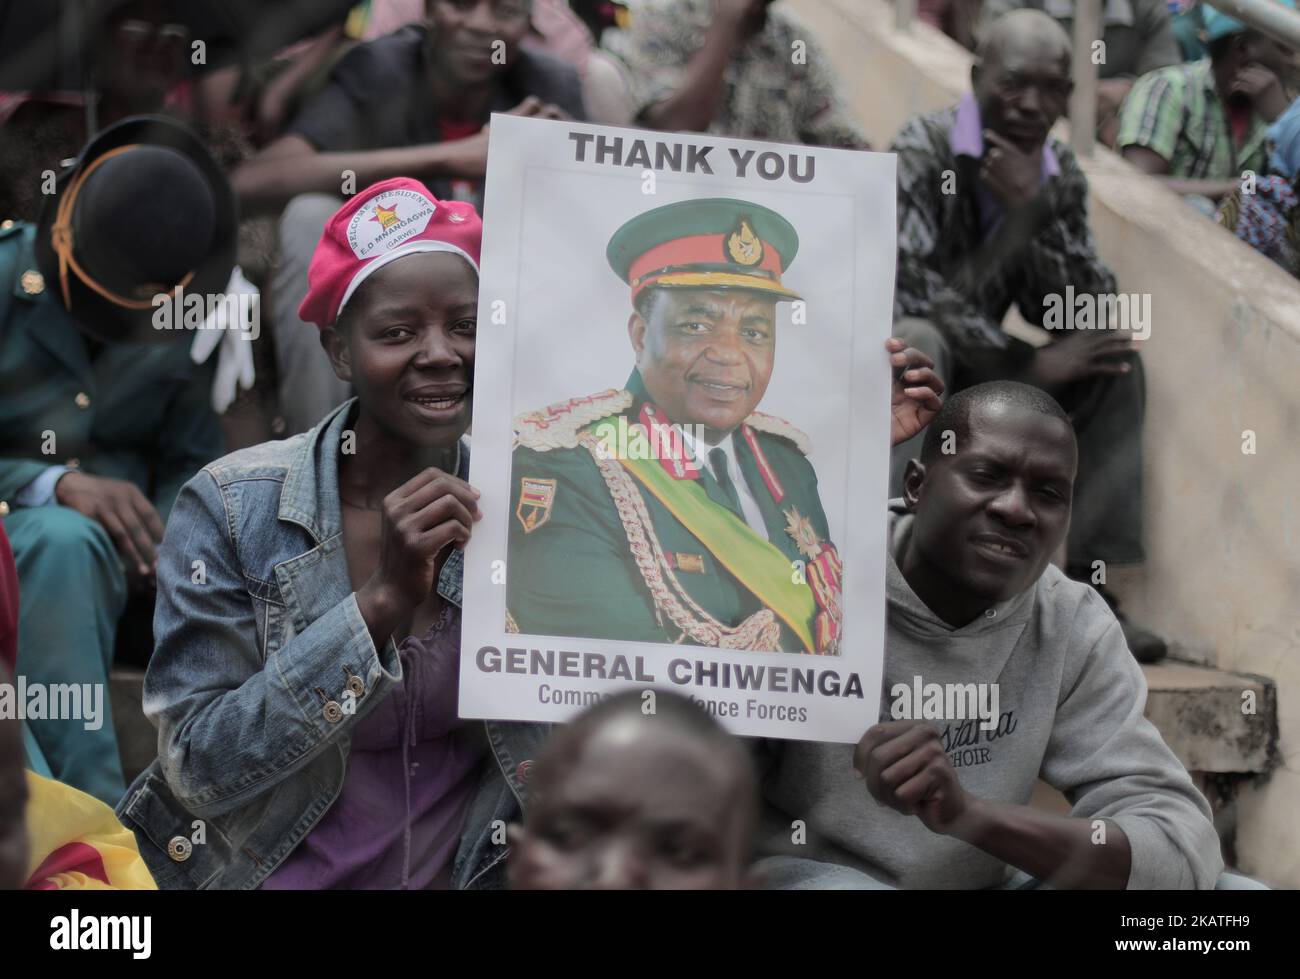 People react as Zimbabwean new President Emmerson Mnangagwa is officially sworn-in during a ceremony in Harare on November 24, 2017. Emmerson Mnangagwa took the oath of office on November 24th at the national sports stadium on the outskirts of Harare to cheers from the full-to-capacity crowd.(Photo by Belal Khaled/NurPhoto) Stock Photo